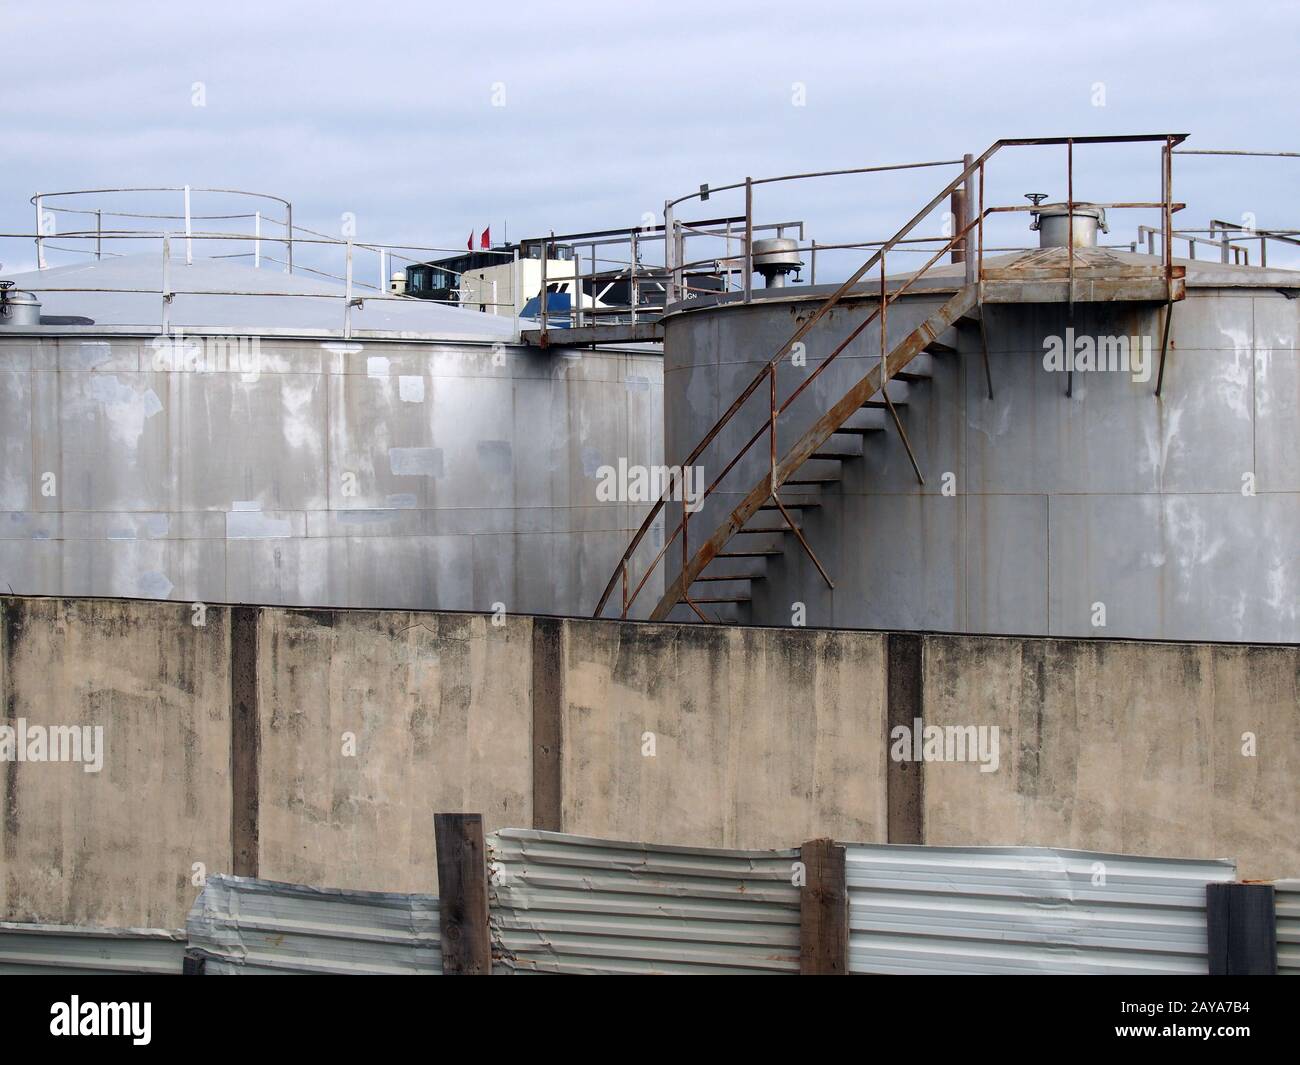 old steel industrial storage tanks with rusty stairs and walkways behind a shabby corrugated iron fence and wall Stock Photo